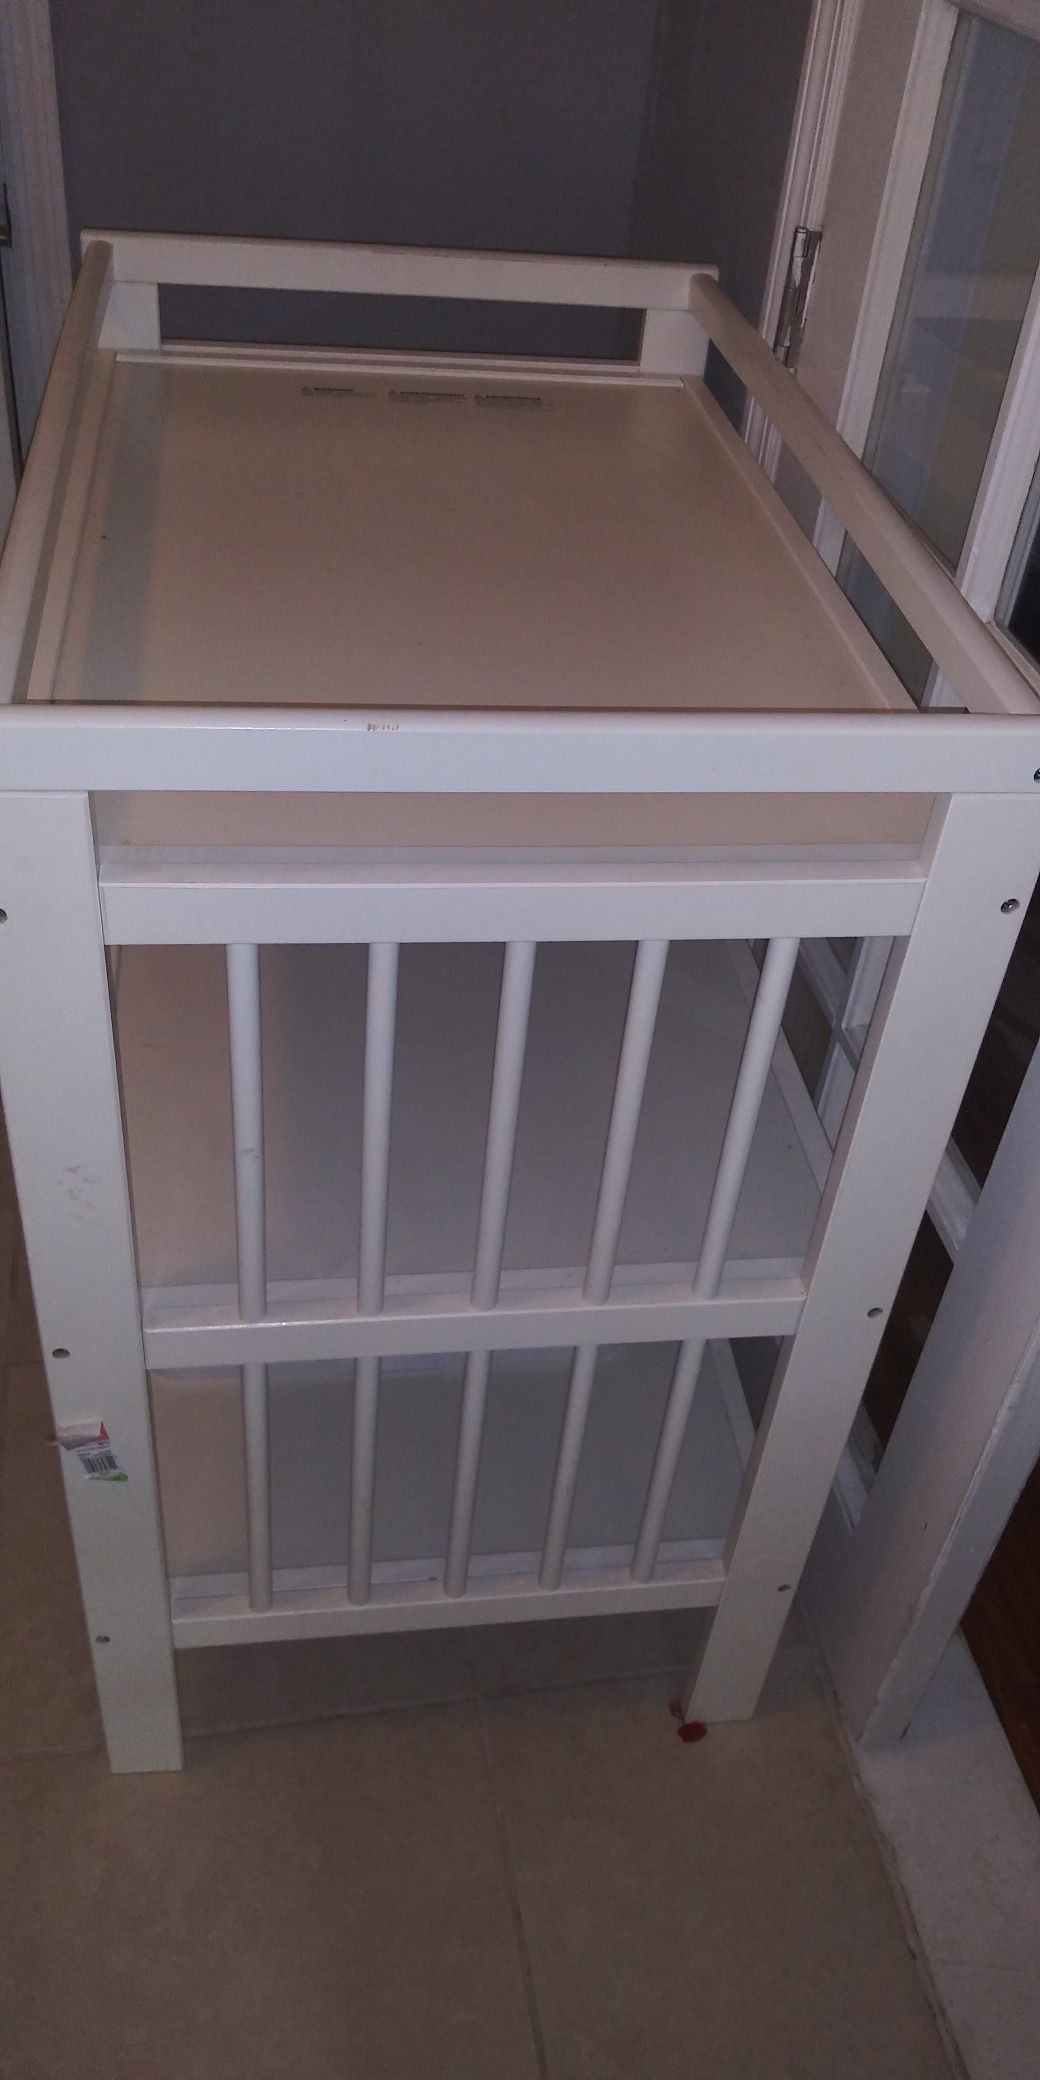 Ikea changing table. Crib no longer available.